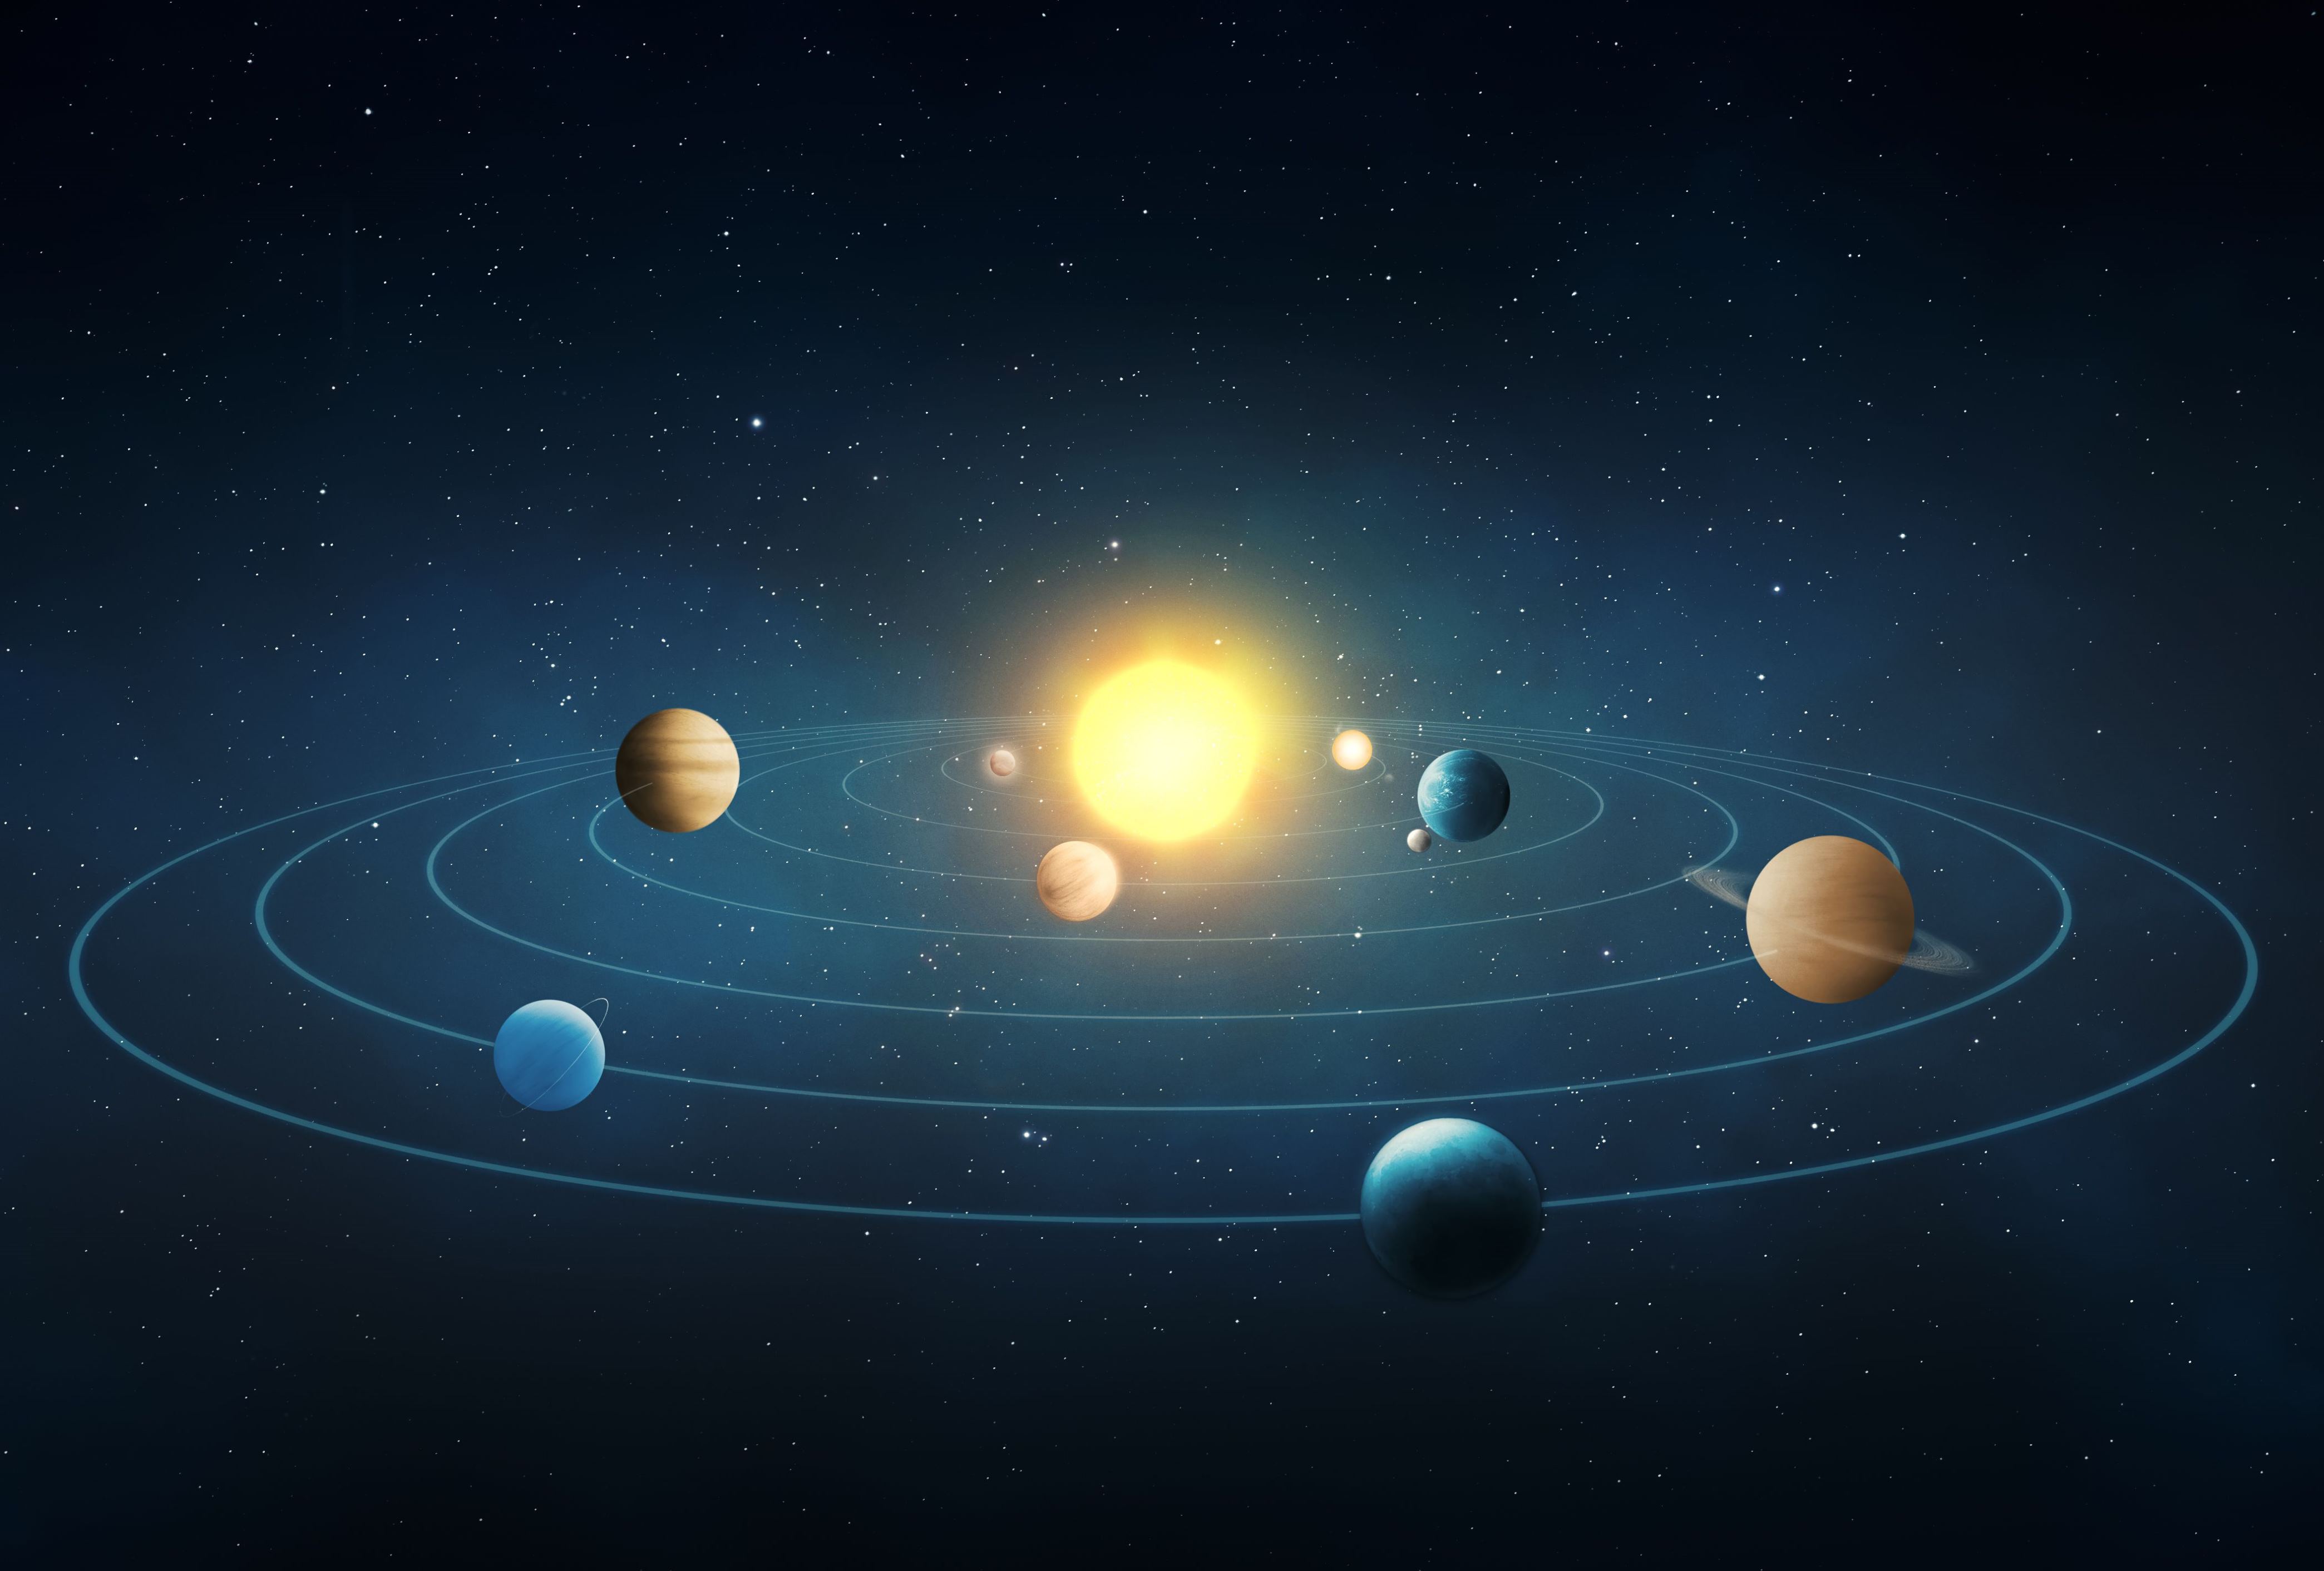 <p class="MsoNormal">The planets in our solar system all orbit in the same direction and are all on the same plane. The path that the planets follow is called the ecliptic, which <a href="https://www.universetoday.com/15959/interesting-facts-about-the-solar-system/">supports the theory</a> that the solar system formed from a large cloud of dust and gas that condensed and began to spin.</p>